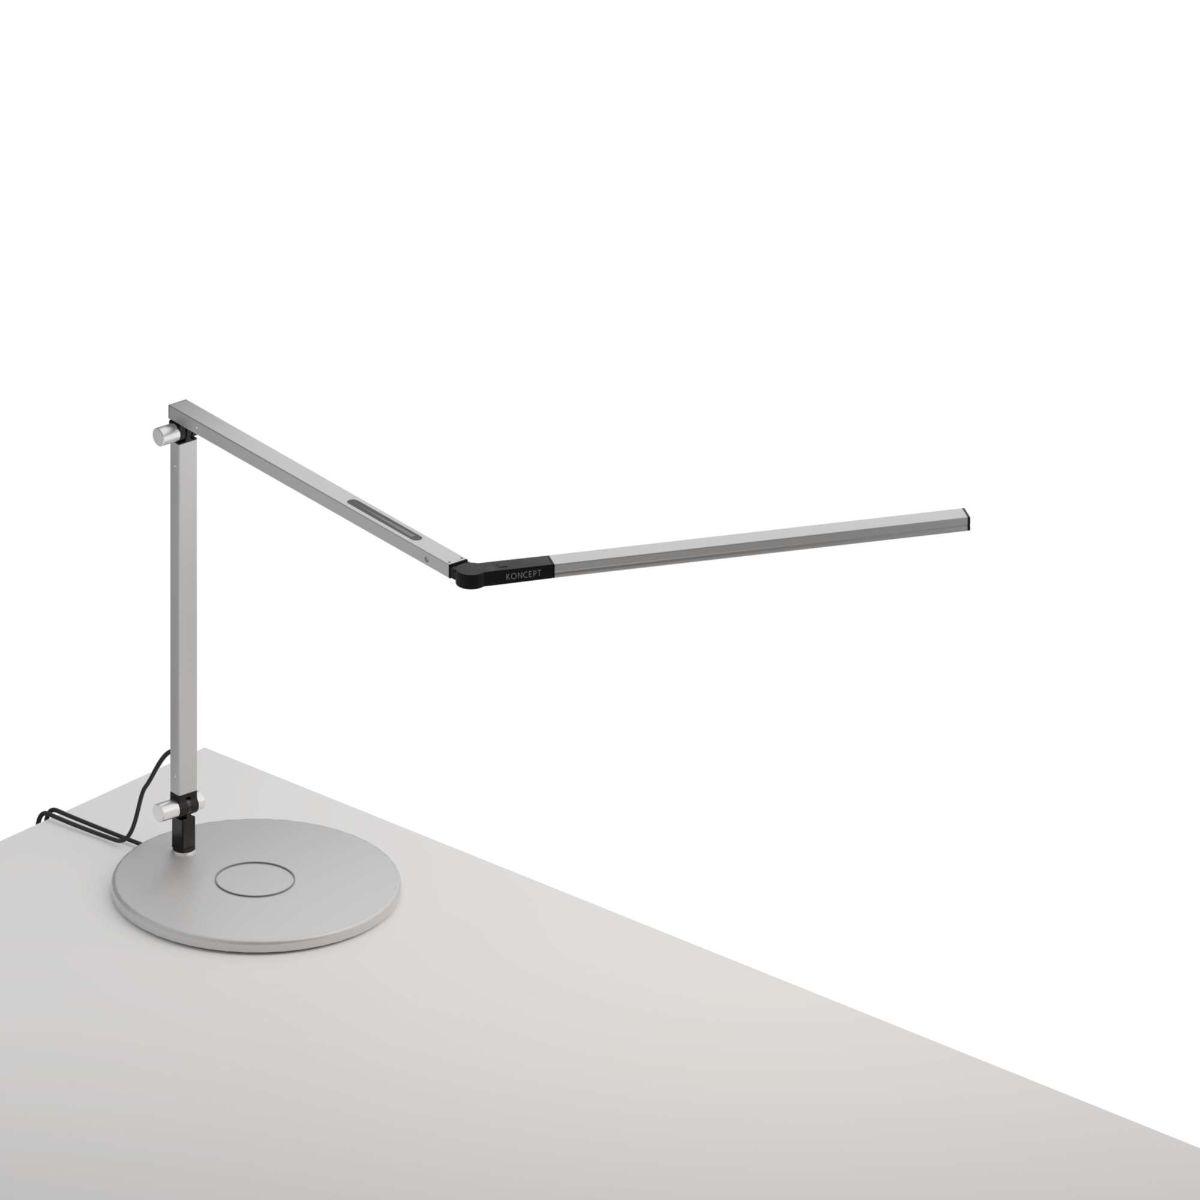 Z-Bar Mini Contemporary Cool White LED Desk Lamp with Wireless Charging Base